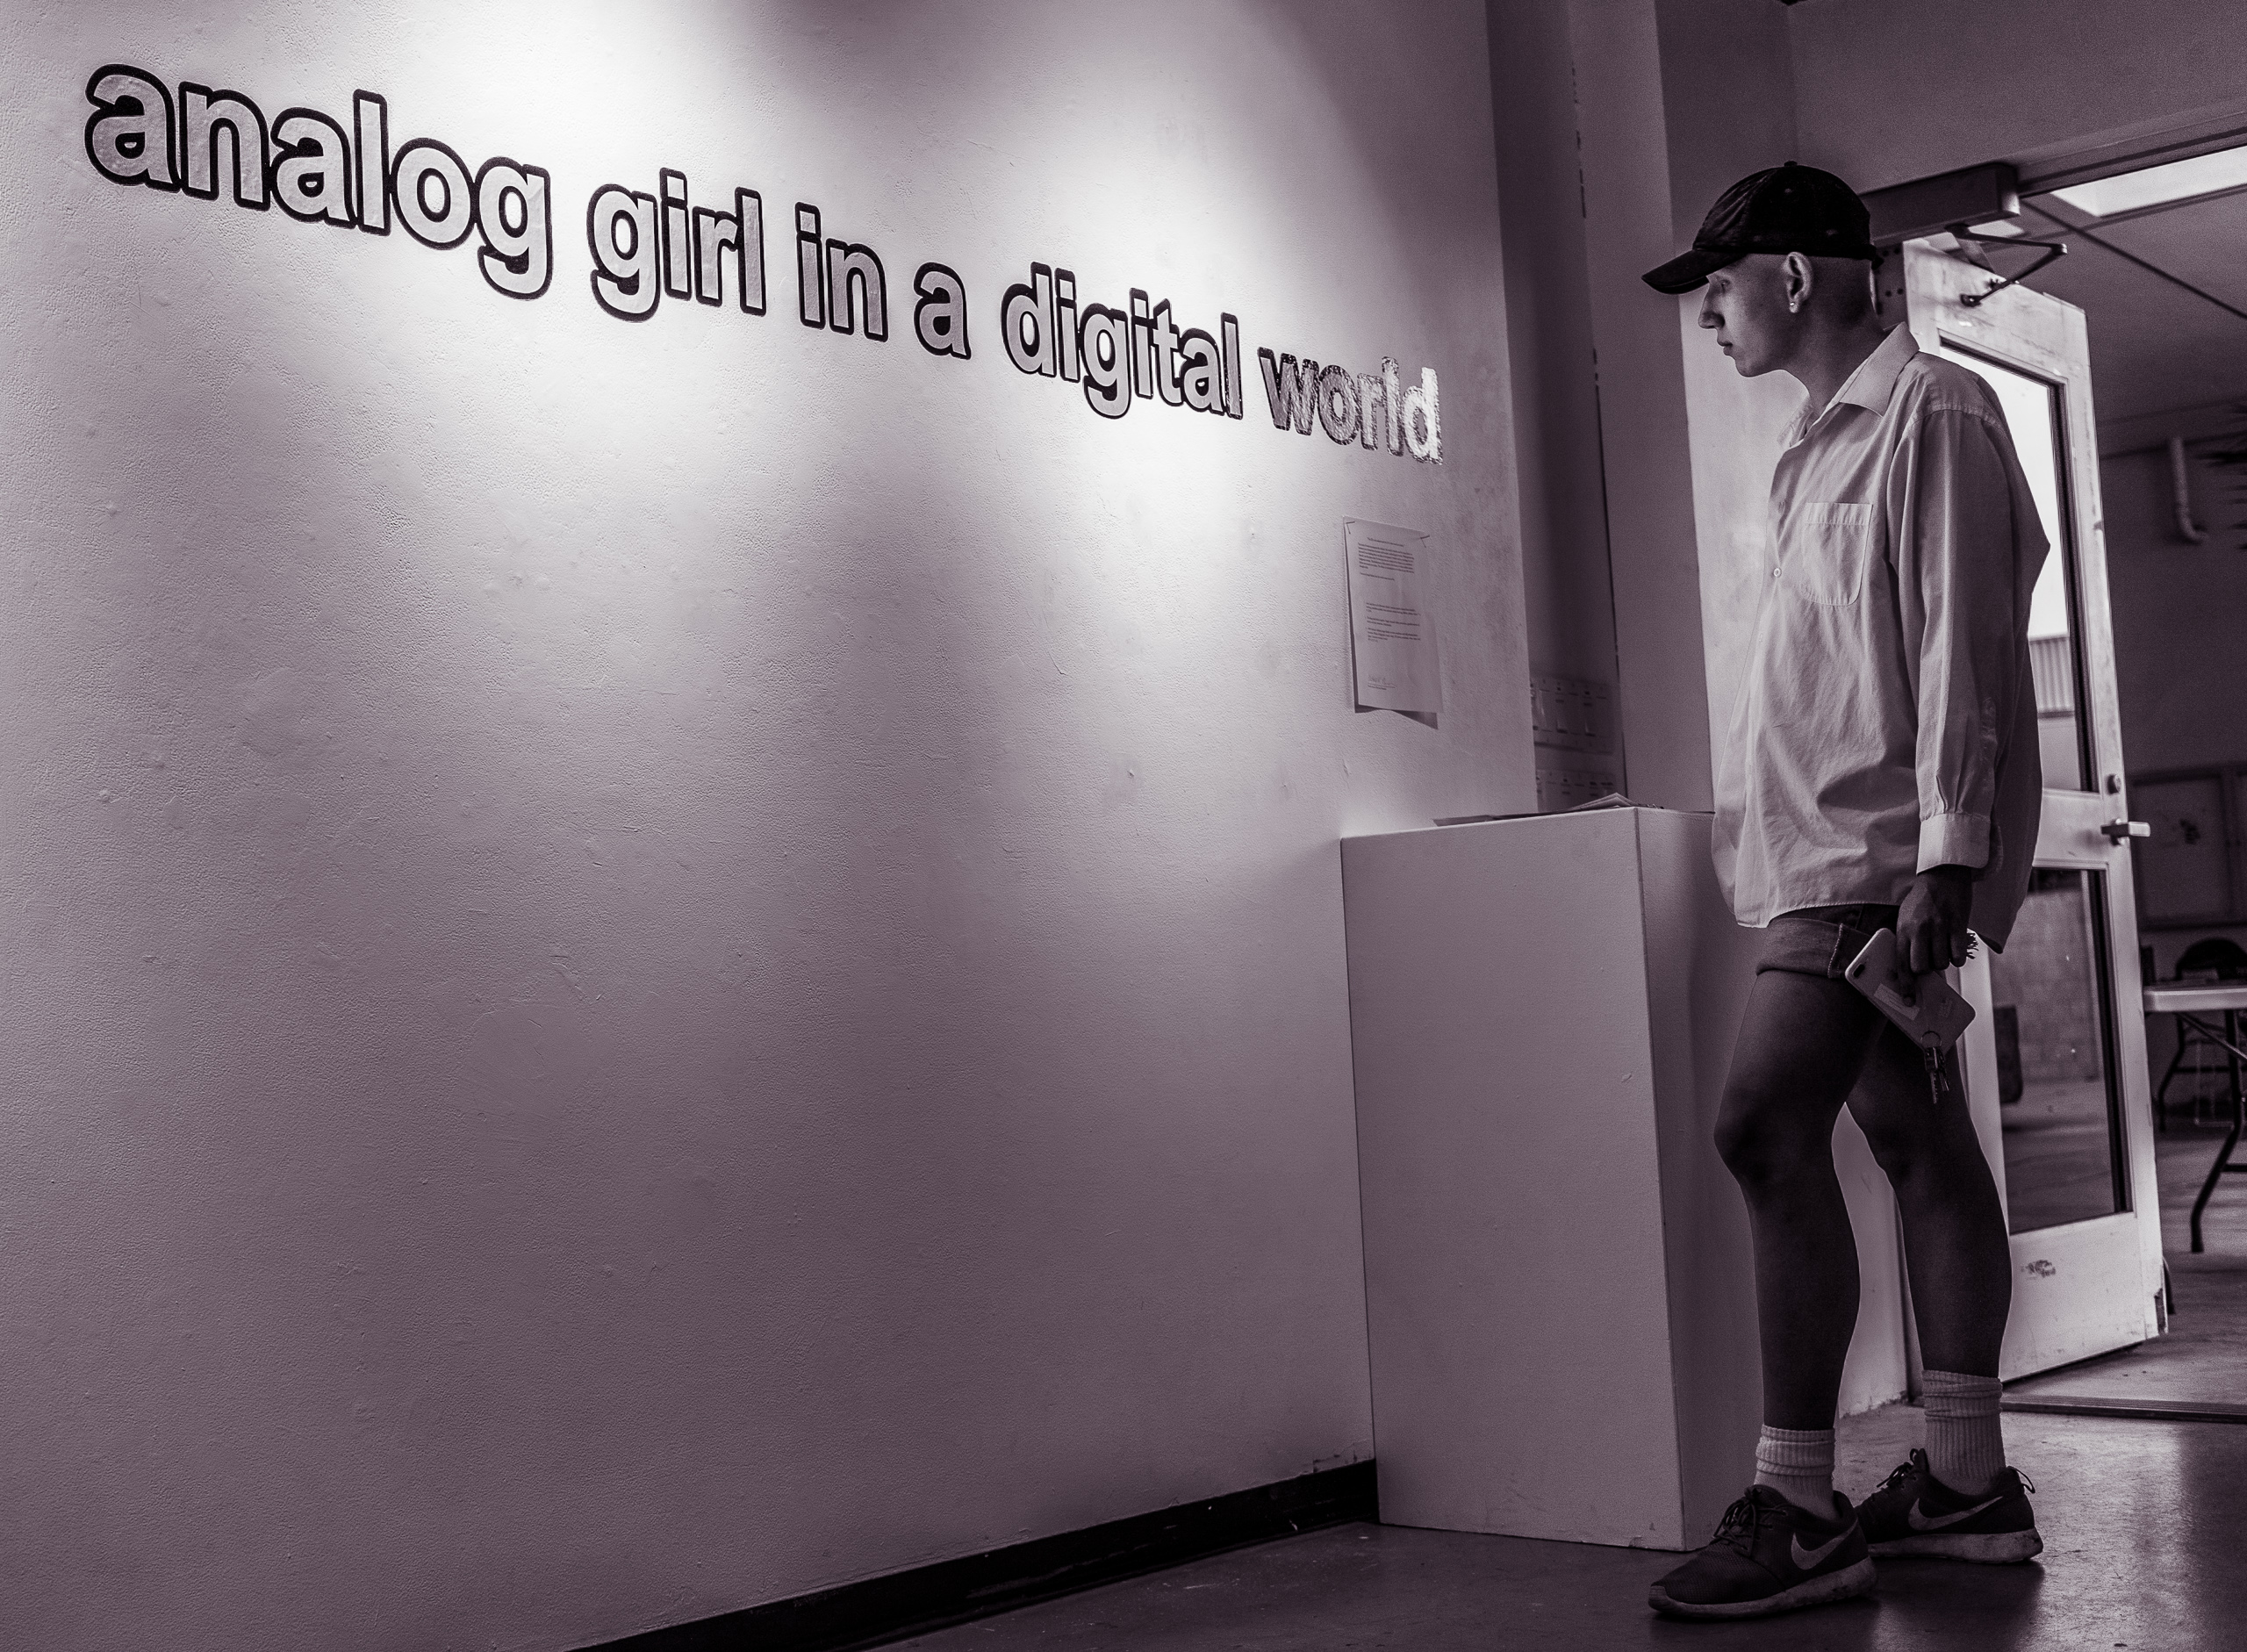 a visitor to the gallery reads the artist's statement on the wall. Next to him is the title of the exhibition on the wall, "analog girl in a digital world"